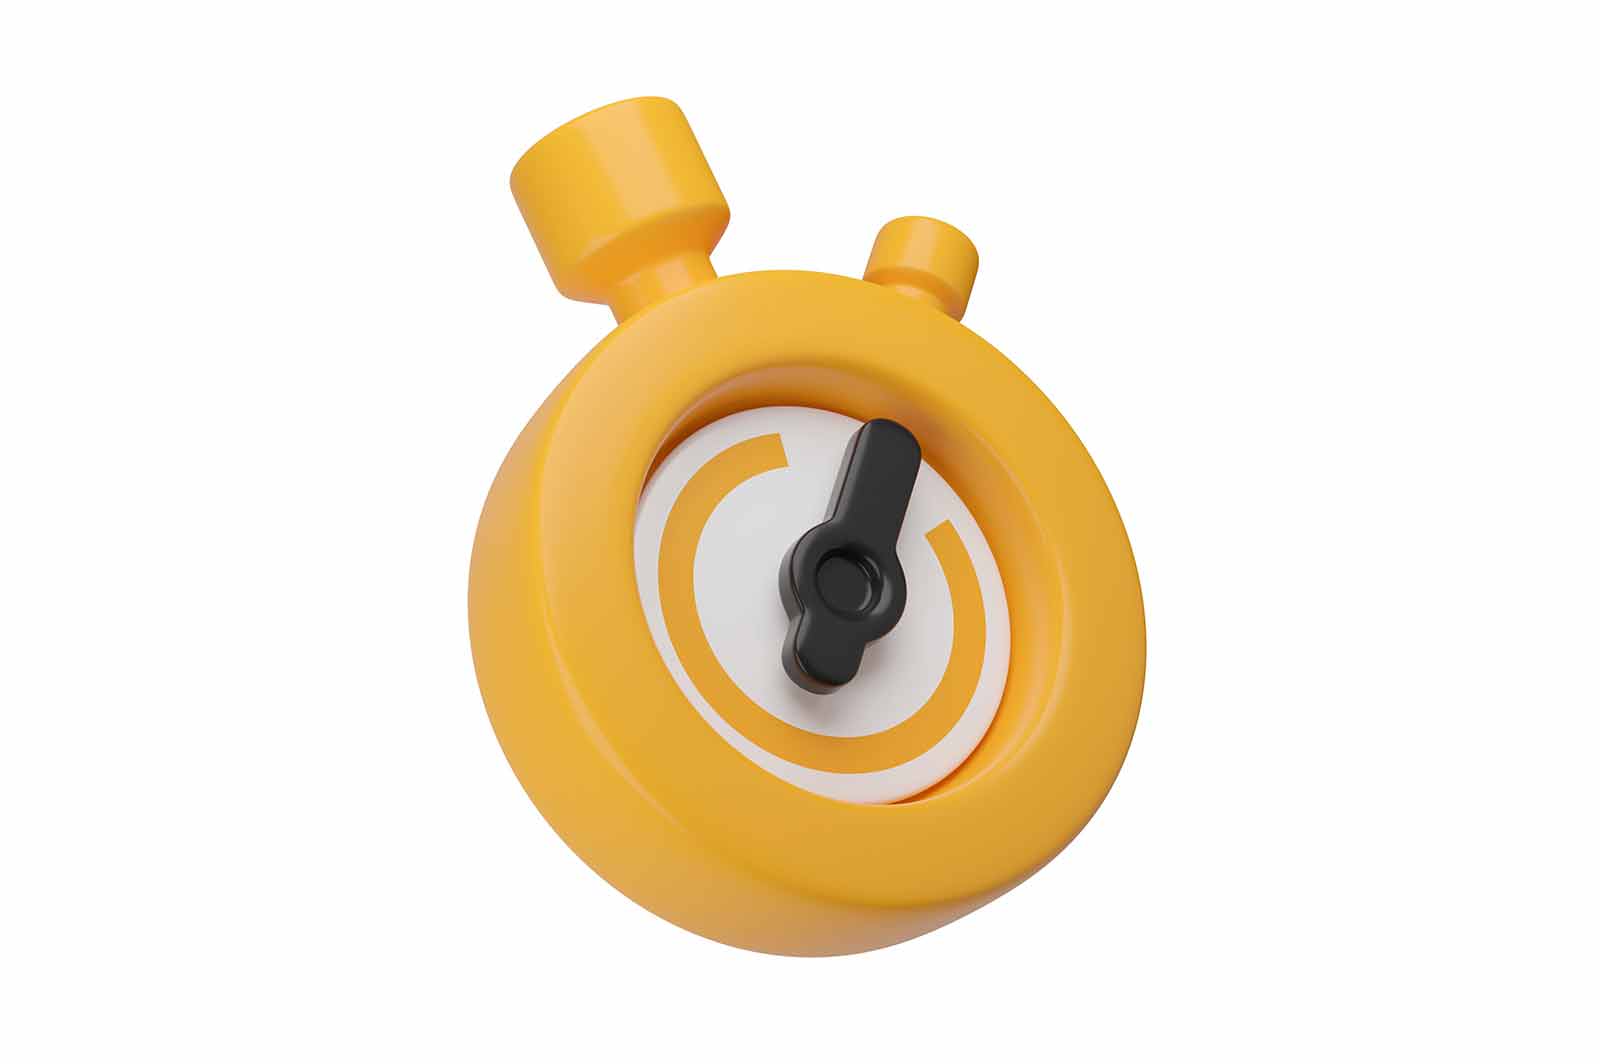 Stopwatch is a 3d rendered illustration of a yellow stopwatch with black dial. It can be used to measure time, speed, or performance.